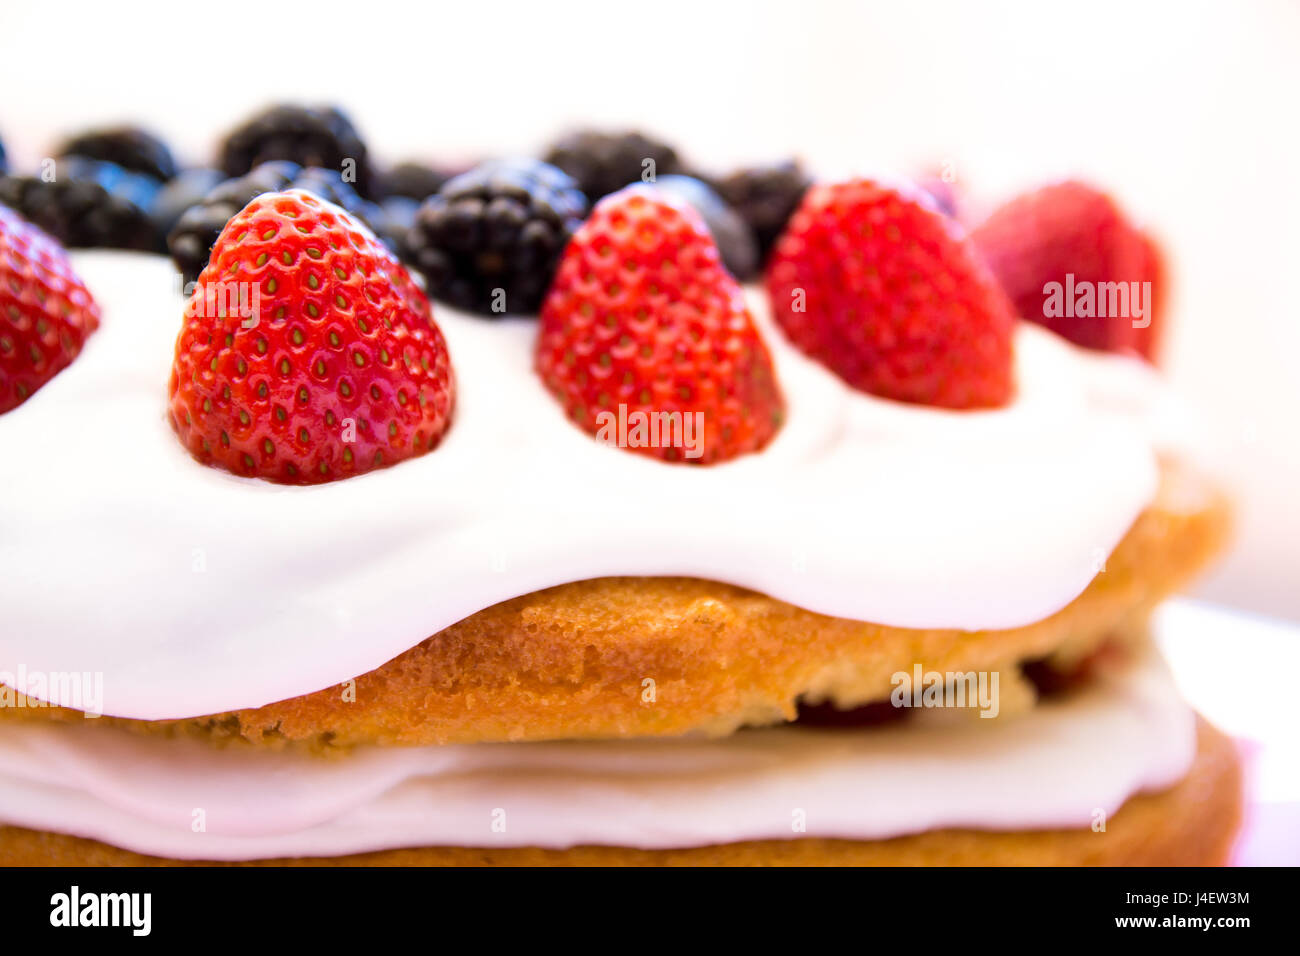 Light sponge cake with white icing and mixed berries (strawberries, blackberries, blueberries) on top. Bright light, warm perfect for summer. Stock Photo